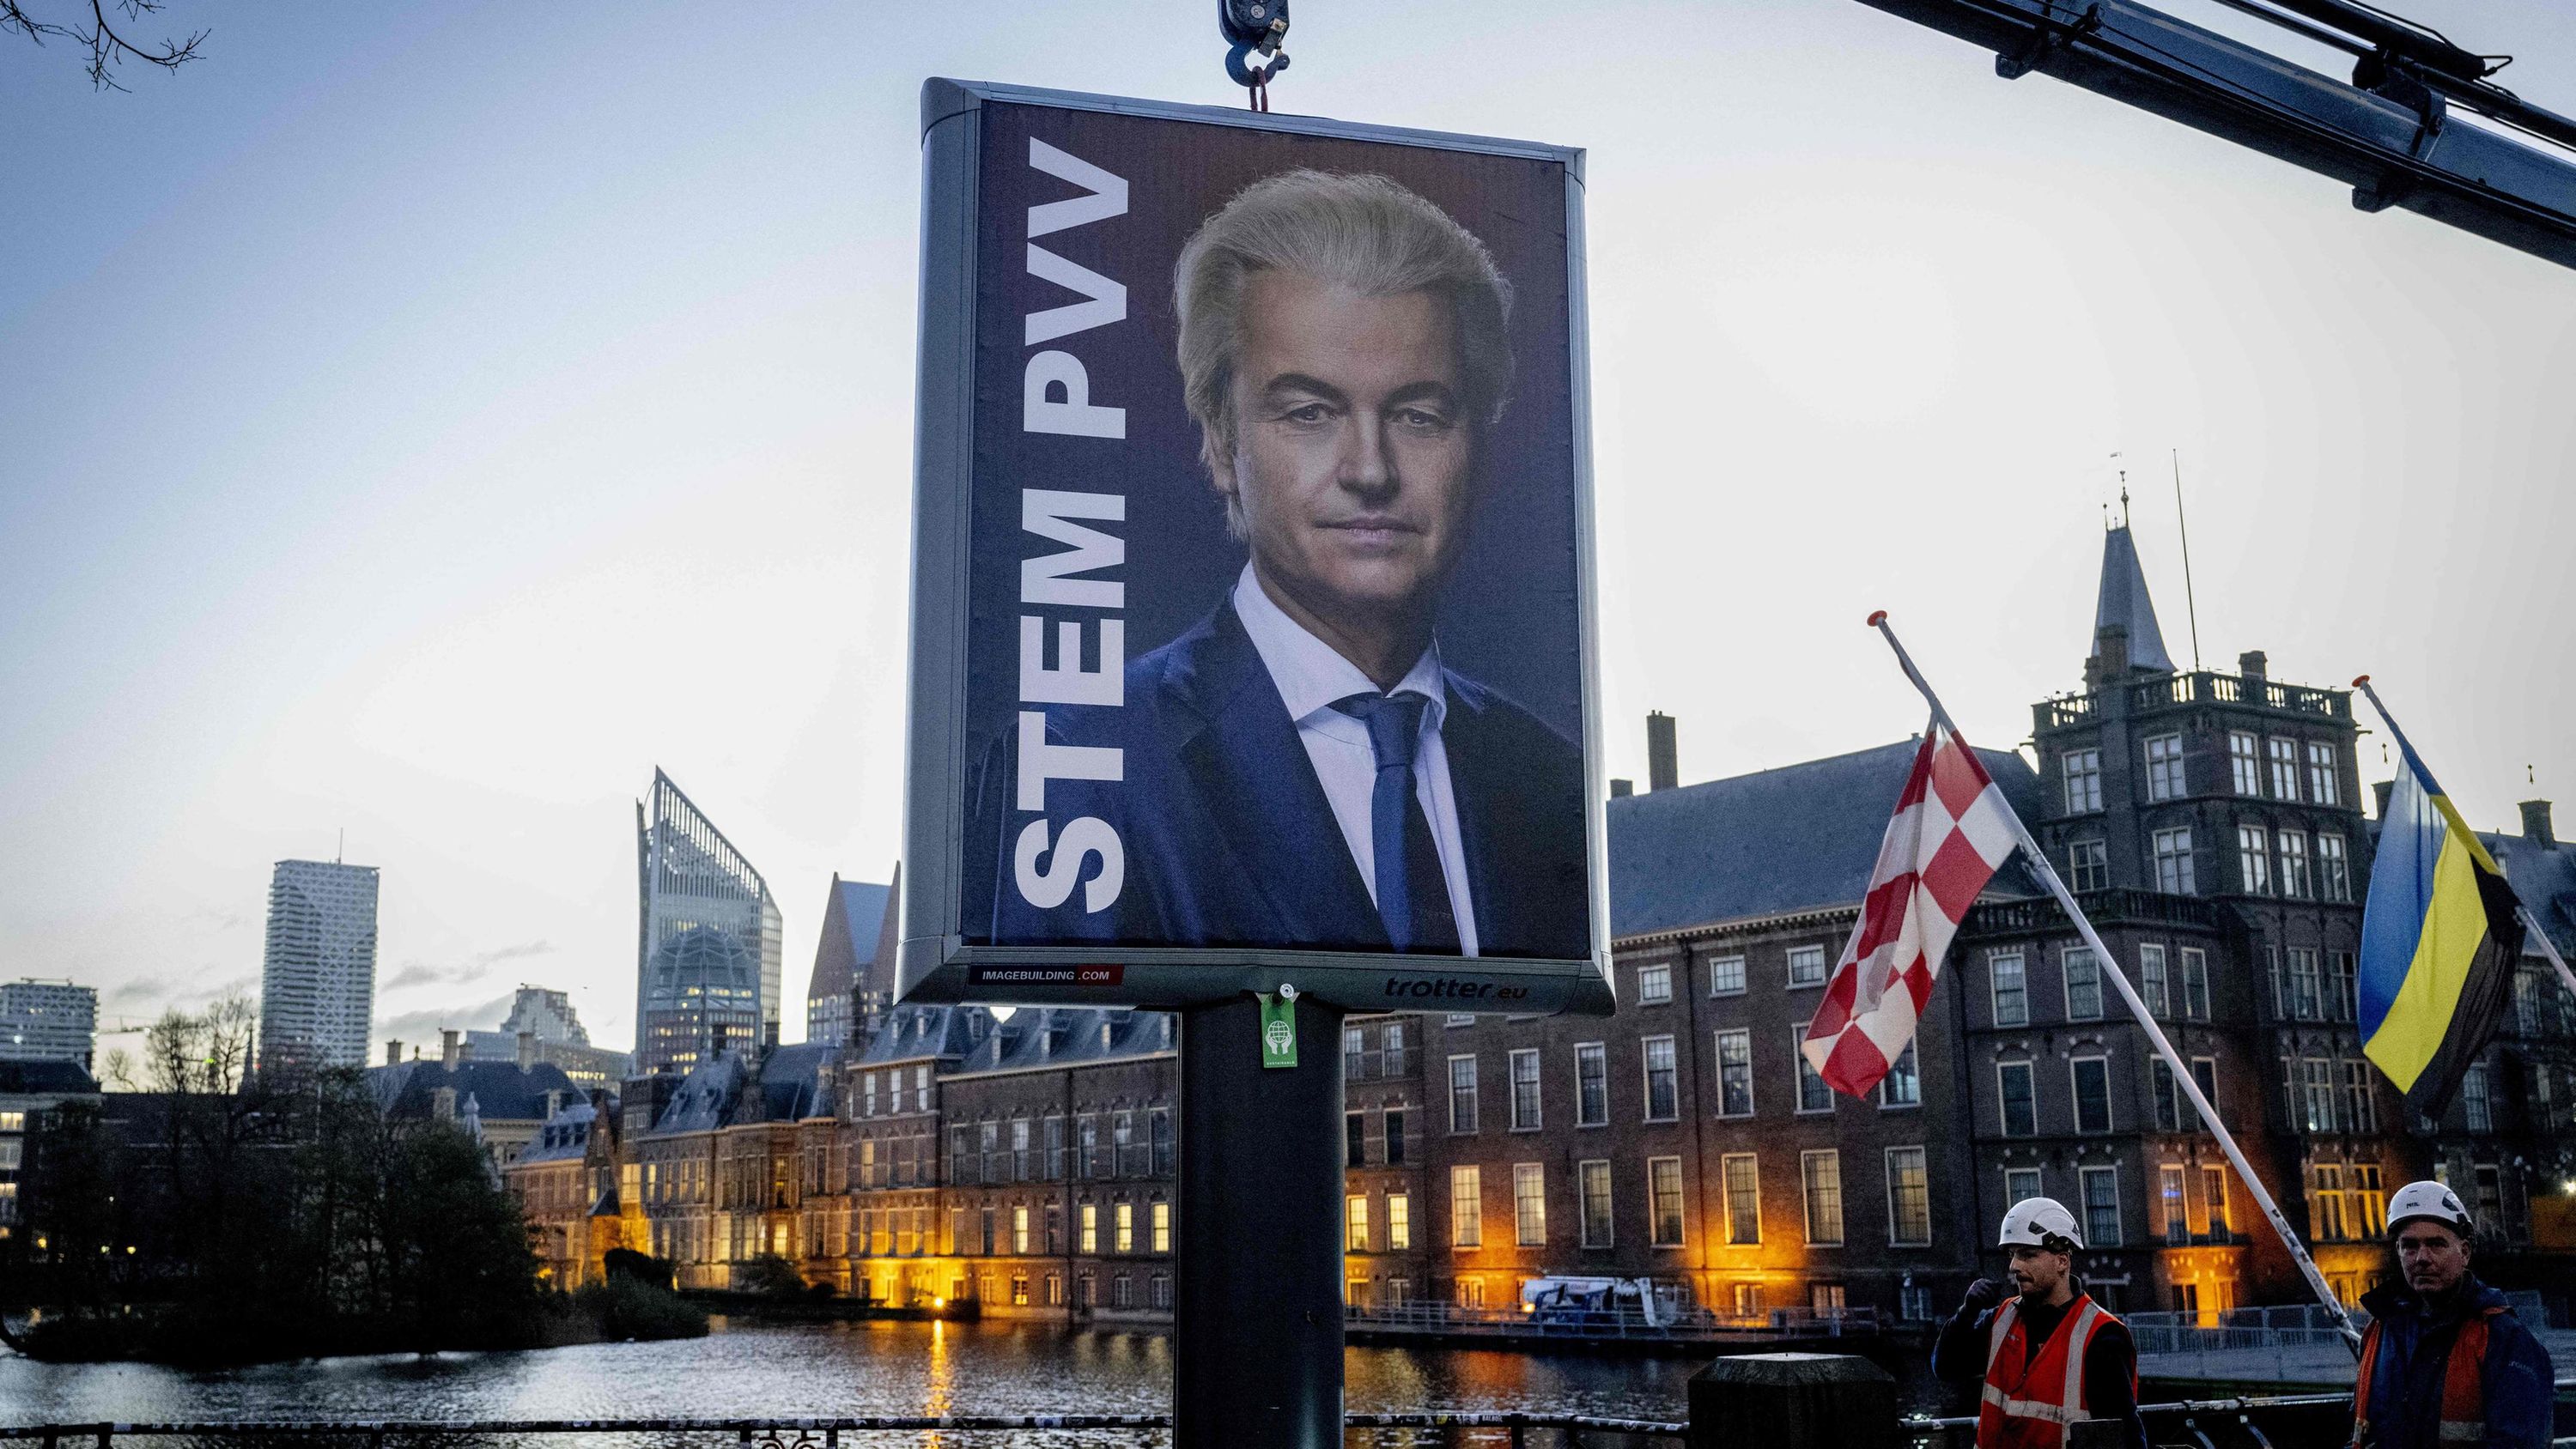 Geert Wilders’ dramatically simple election poster: Devoid of any slogans, it encapsulates post-content politics with its simple appeal to “Vote PVV”. The abbreviation stands for the equally meaningless name Party for Freedom.